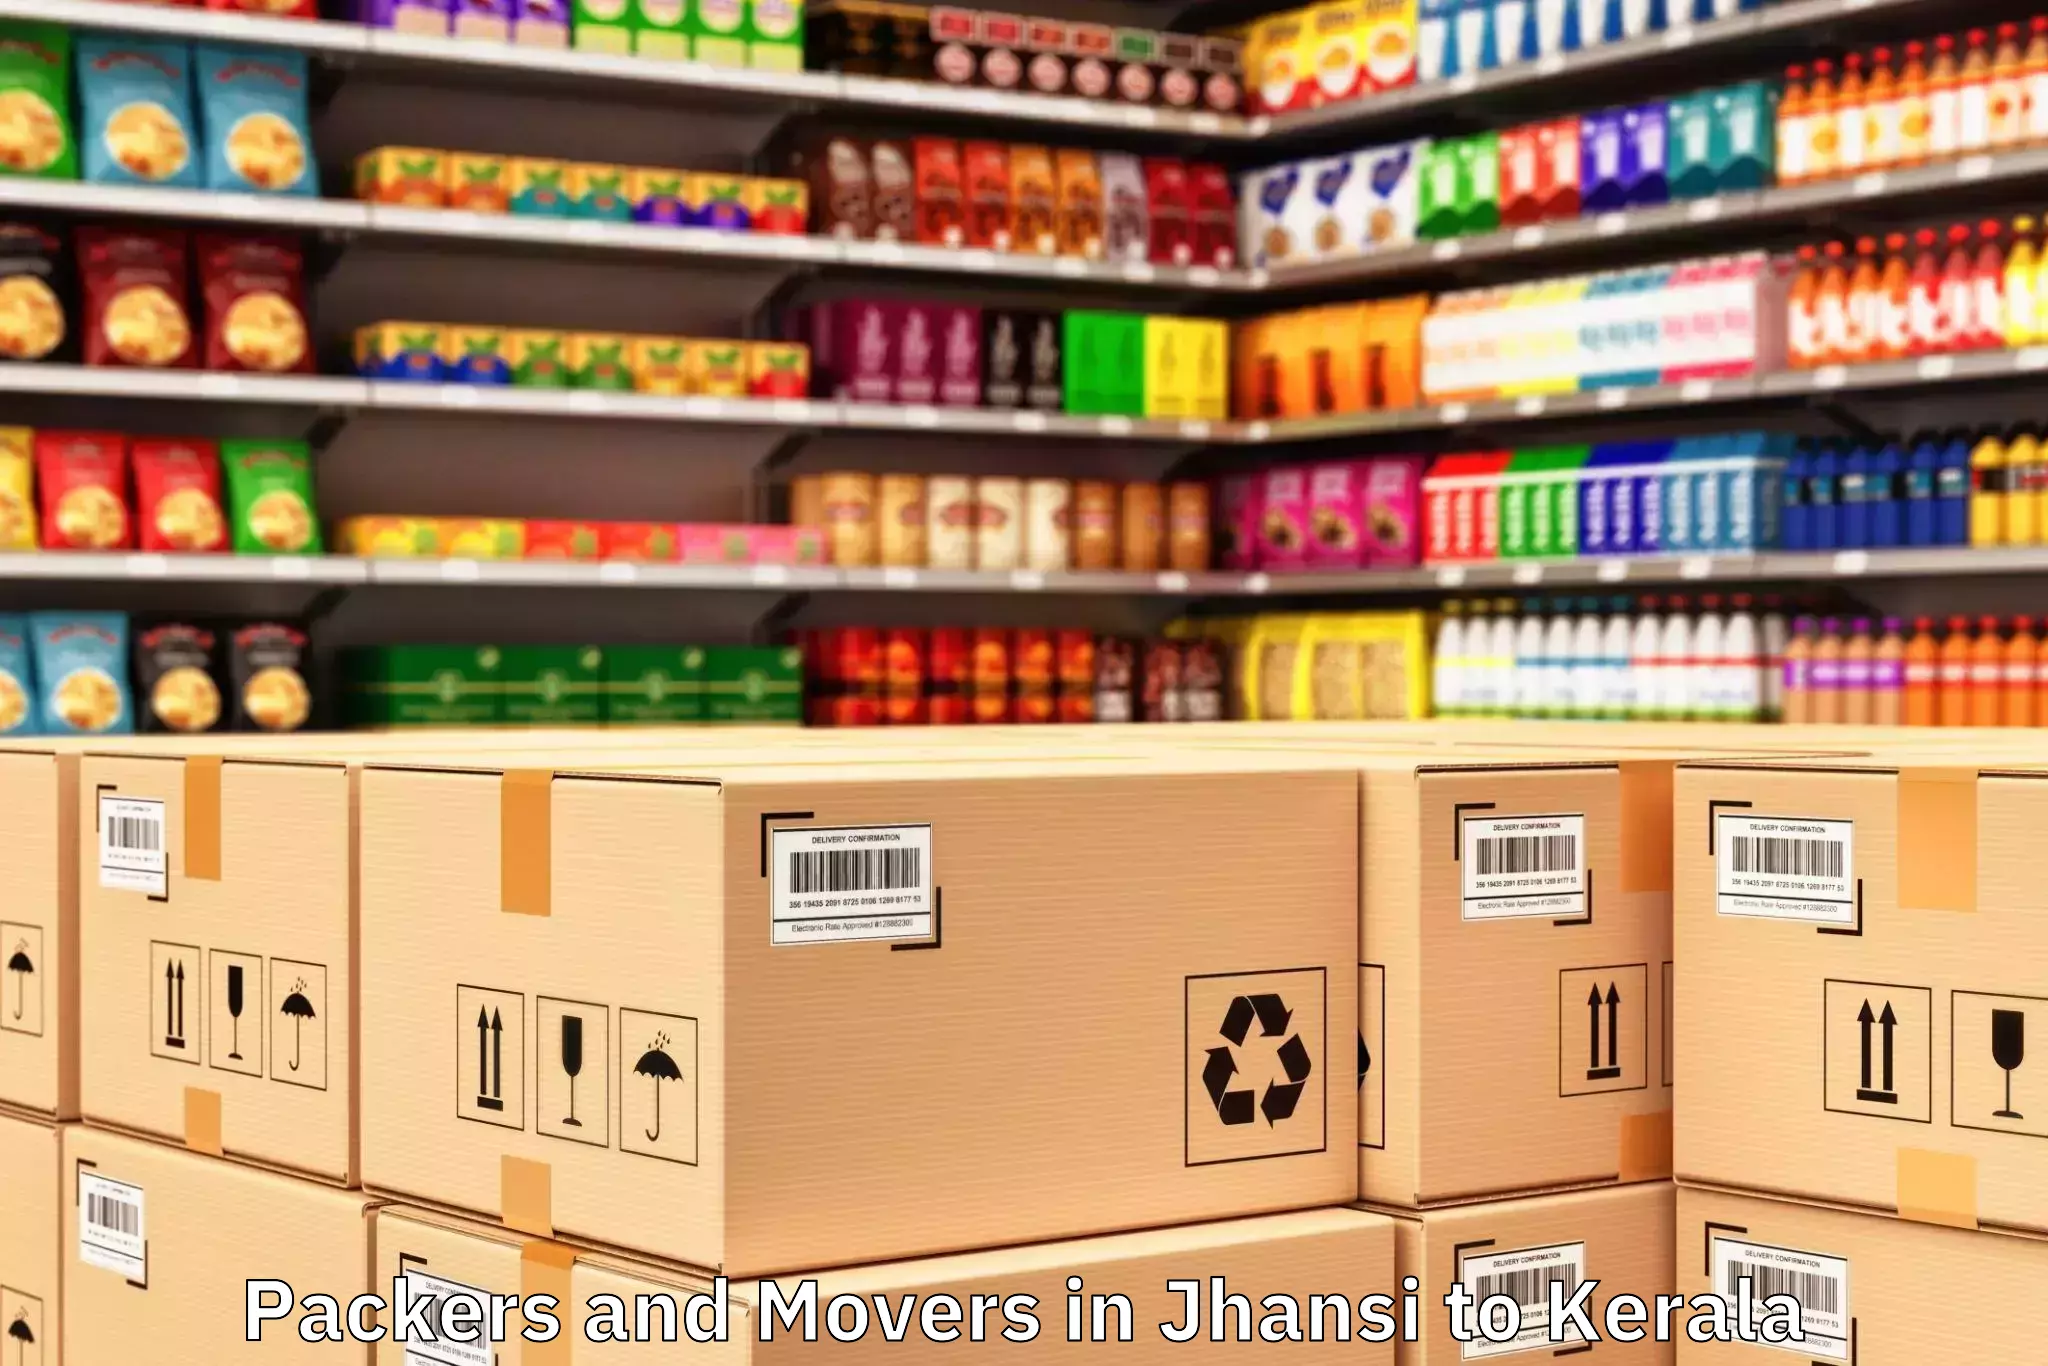 Efficient Jhansi to Hala Mall Puthanathani Packers And Movers